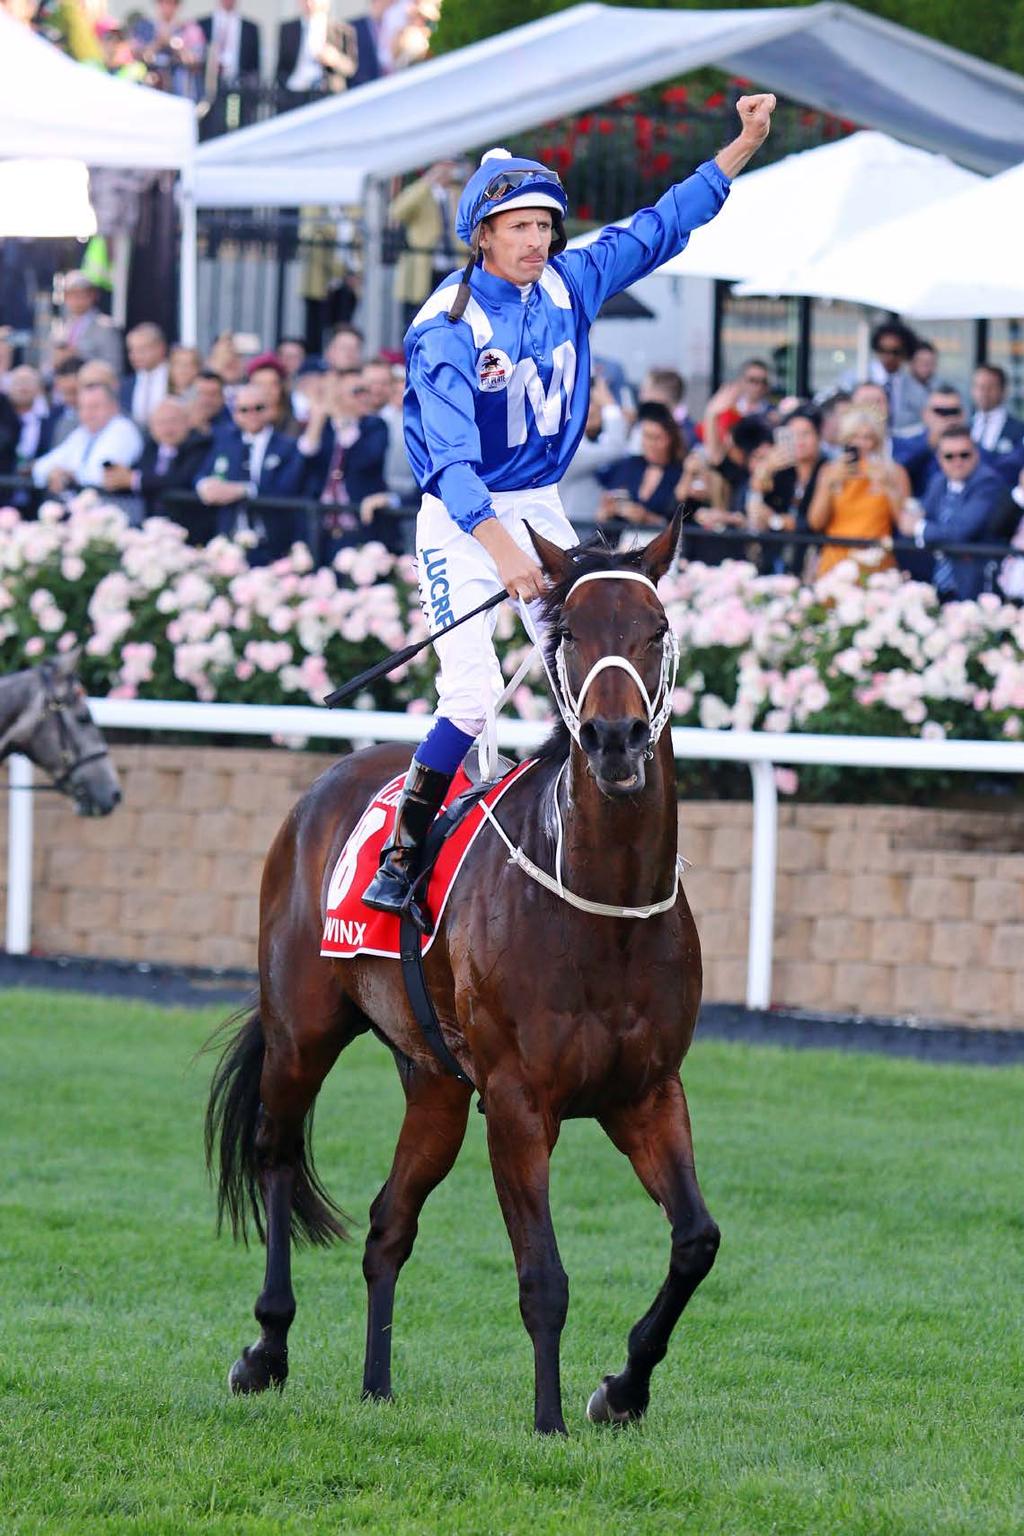 Winx could be better than ever going into Winx Stakes Chris Waller finds it hard to believe that it s possible Winx could be a more potent racehorse than ever but he s not ruling it out ahead of her